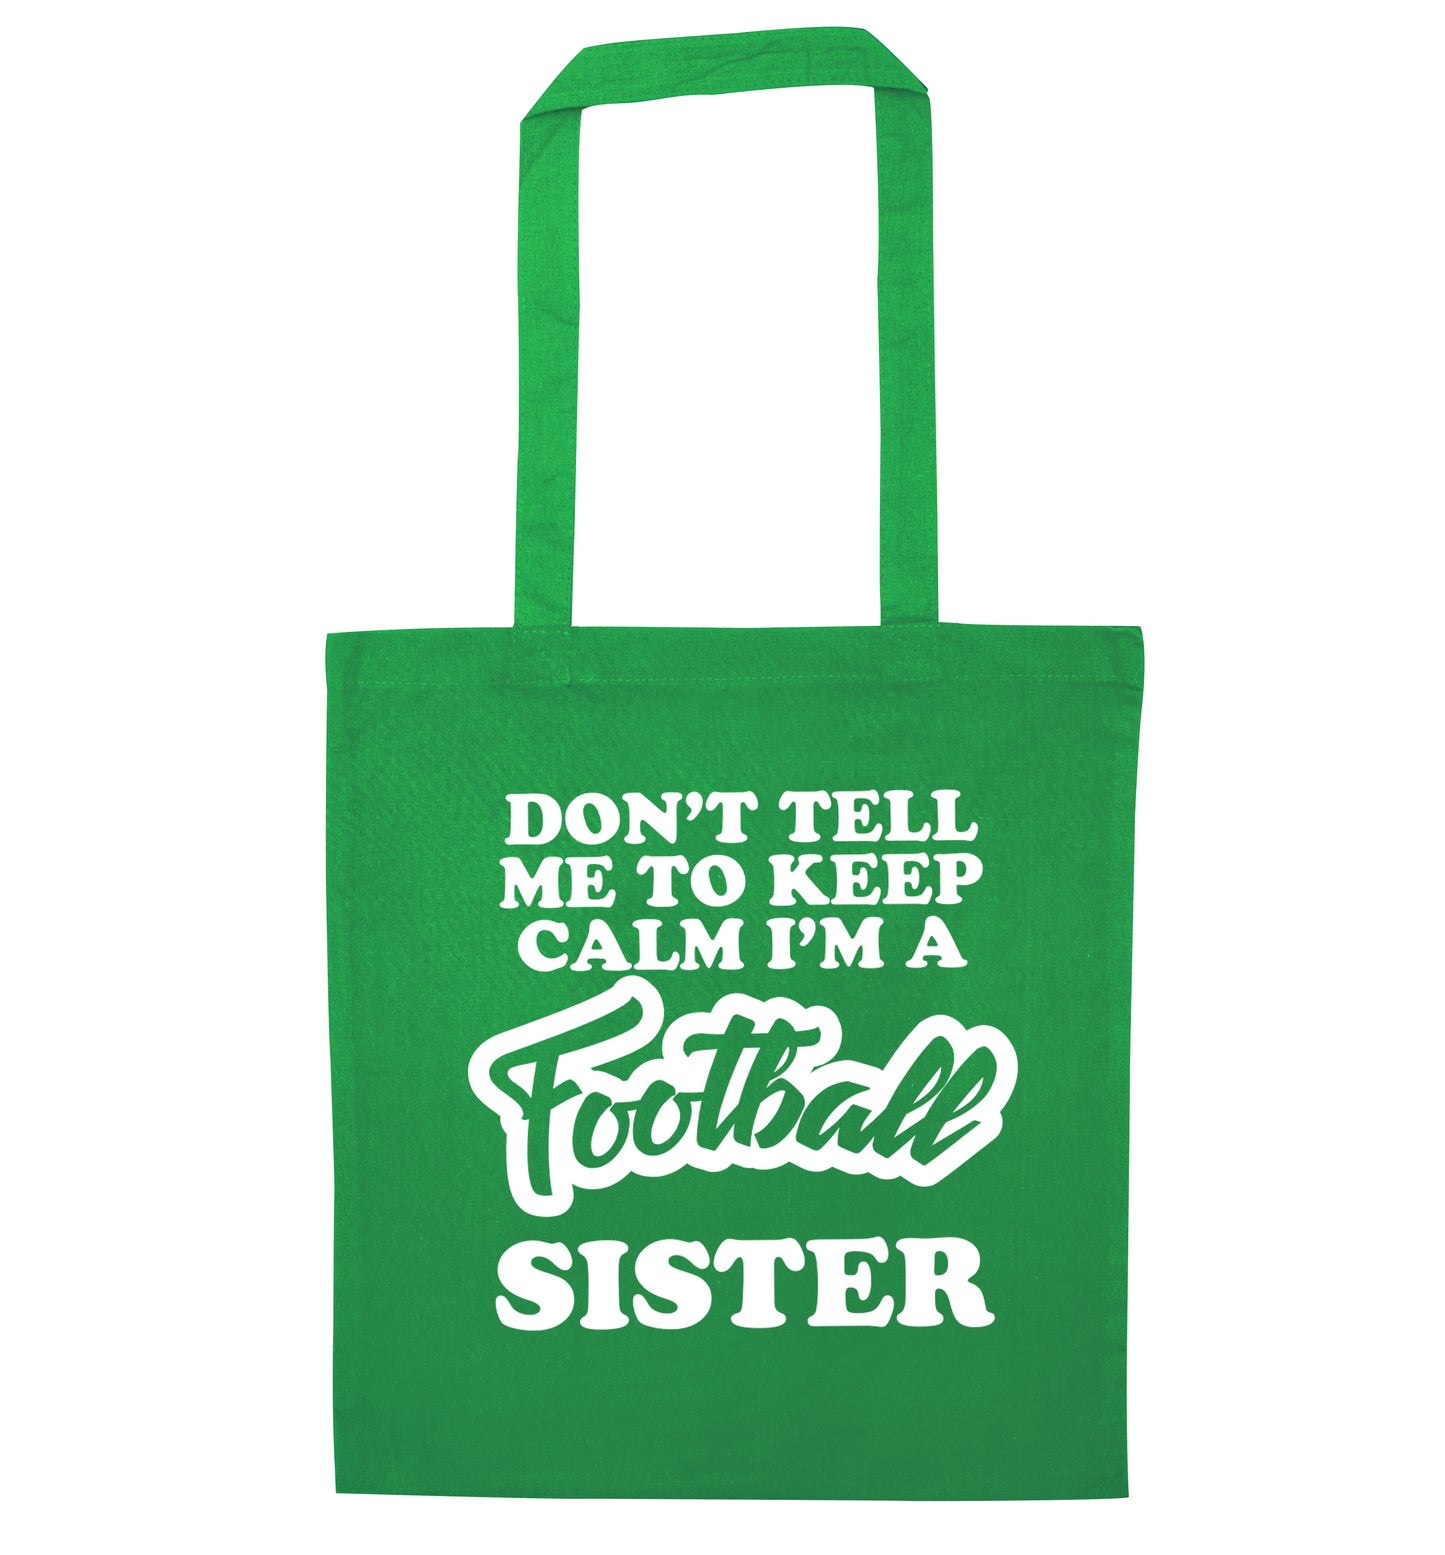 Don't tell me to keep calm I'm a football sister green tote bag